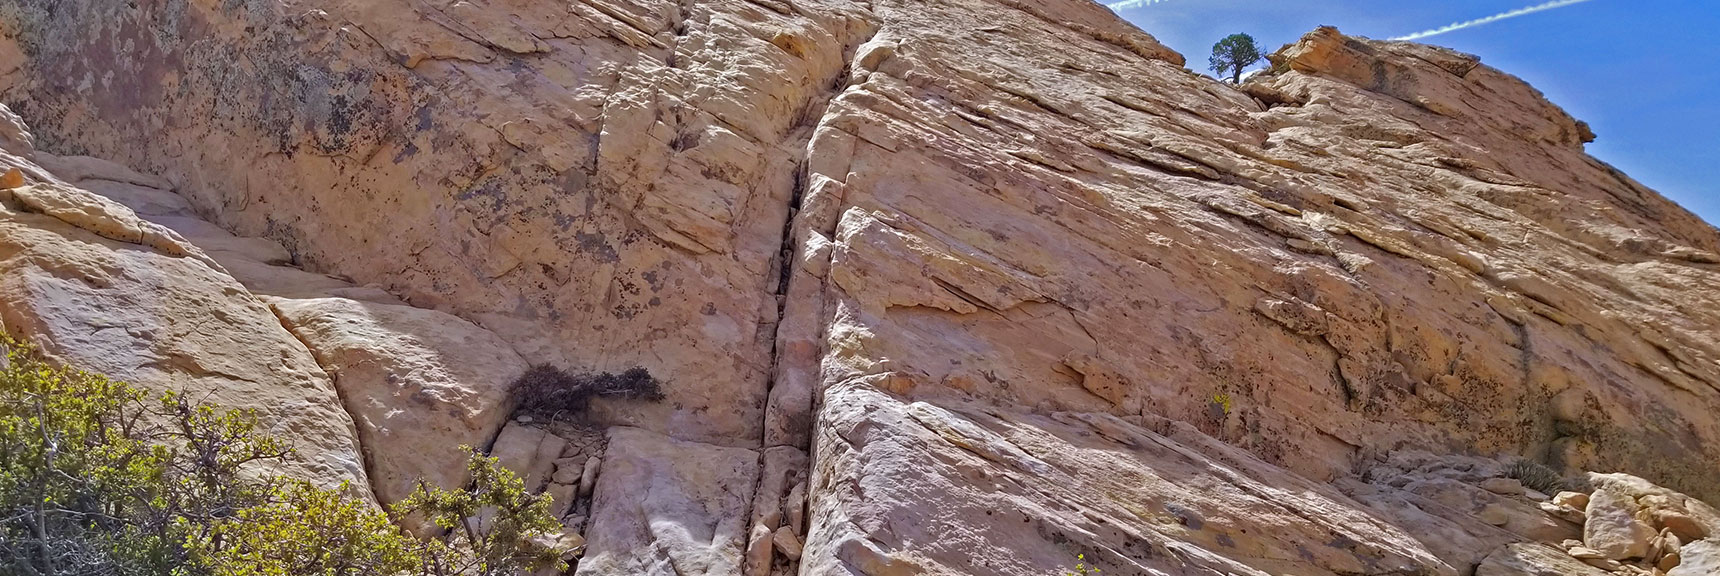 Summit Ascent Crack Easy Class 3, Less Daunting up Close | Windy Peak | Rainbow Mountain Wilderness, Nevada